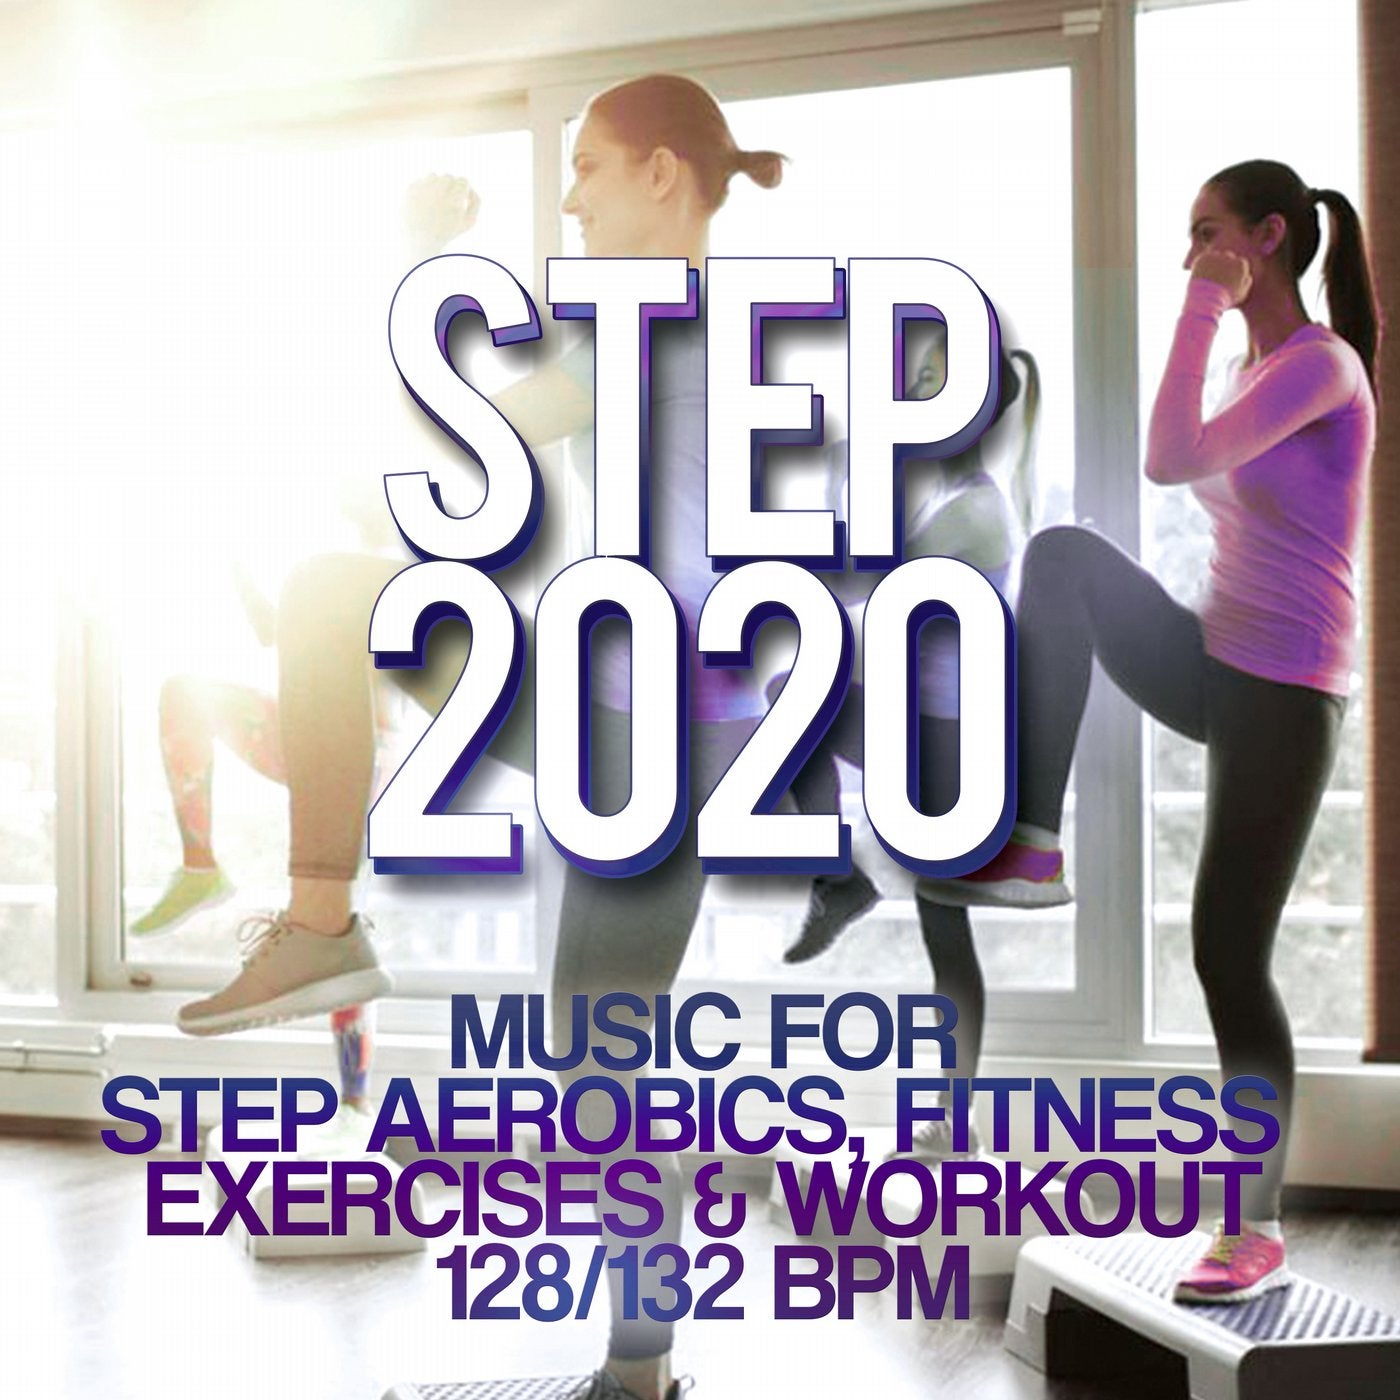 Step 2020 - Music For Step Aerobics, Fitness Exercises & Workout 128/132 Bpm